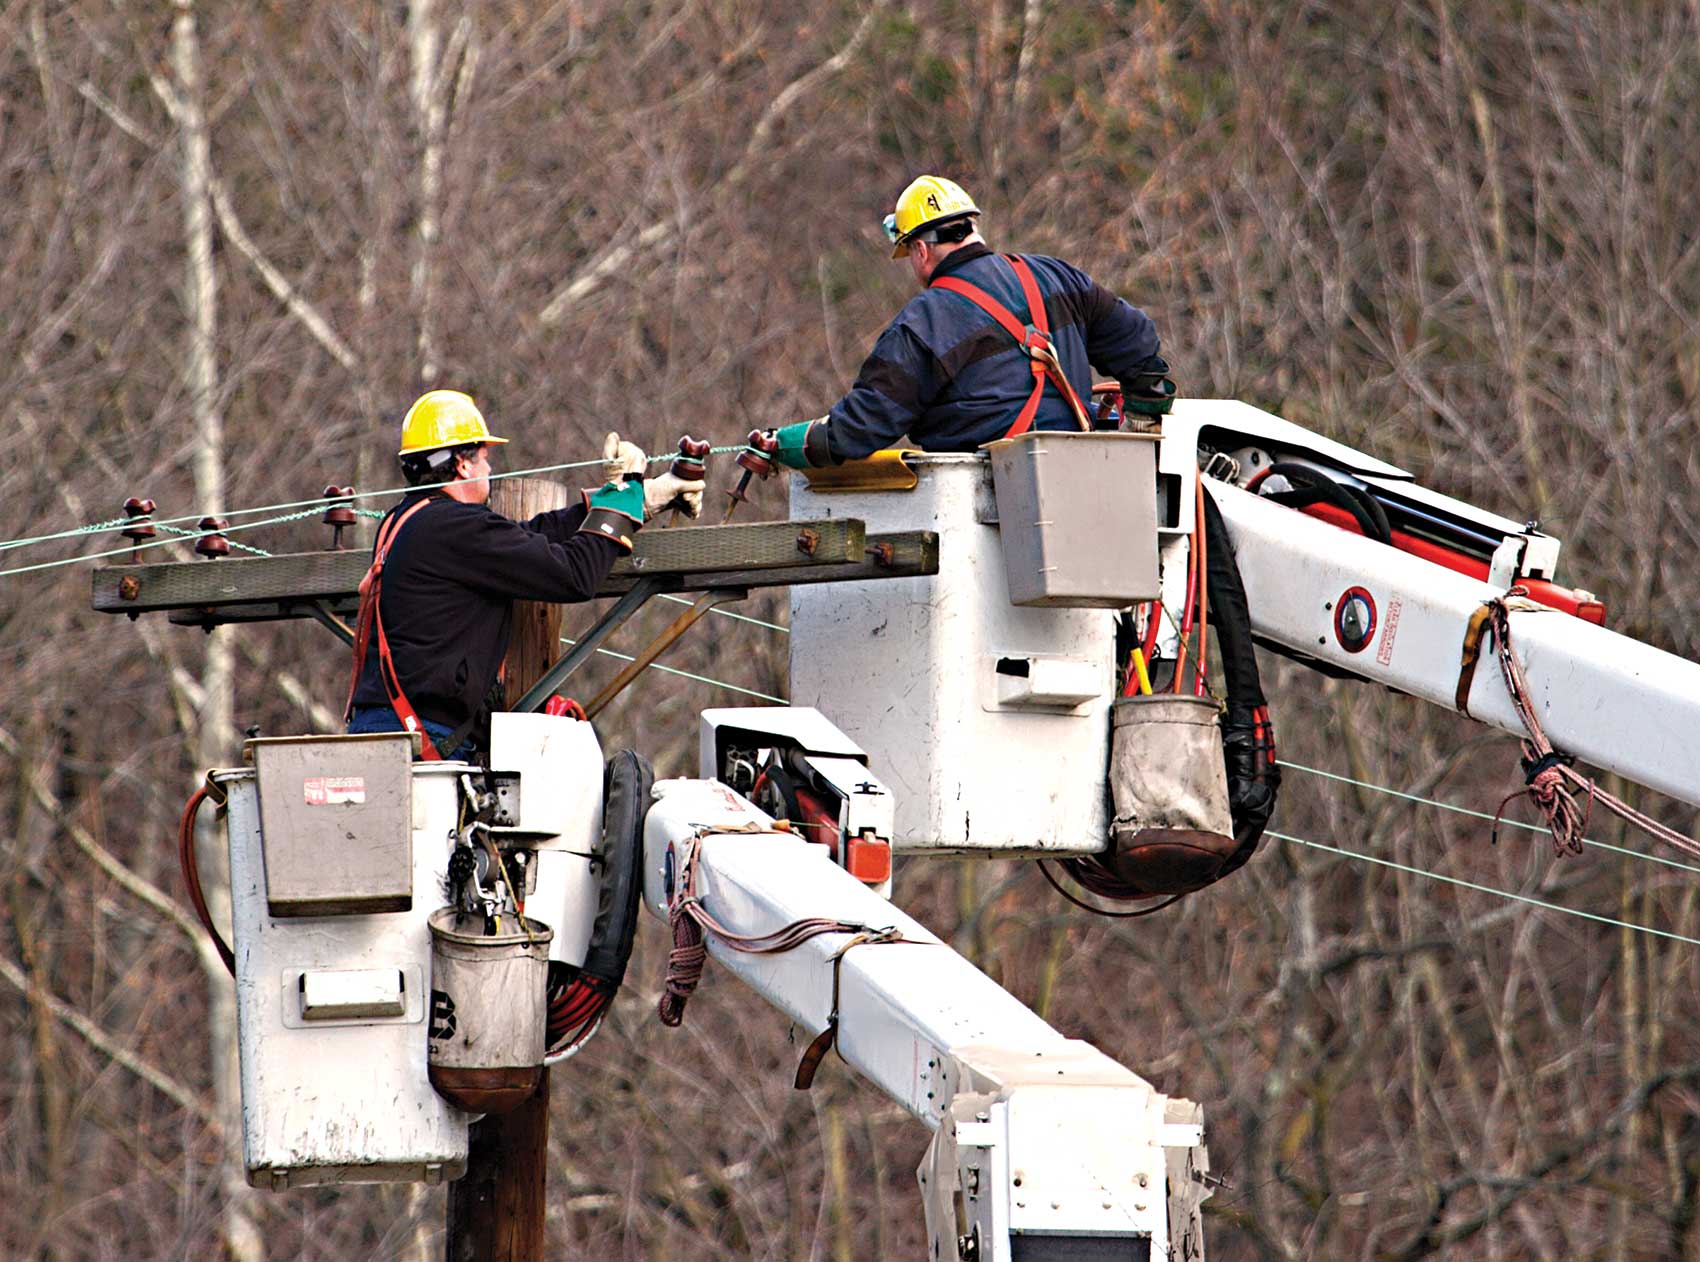 Utility Workers: ESFI examines electrical injuries from 2003 to 2018